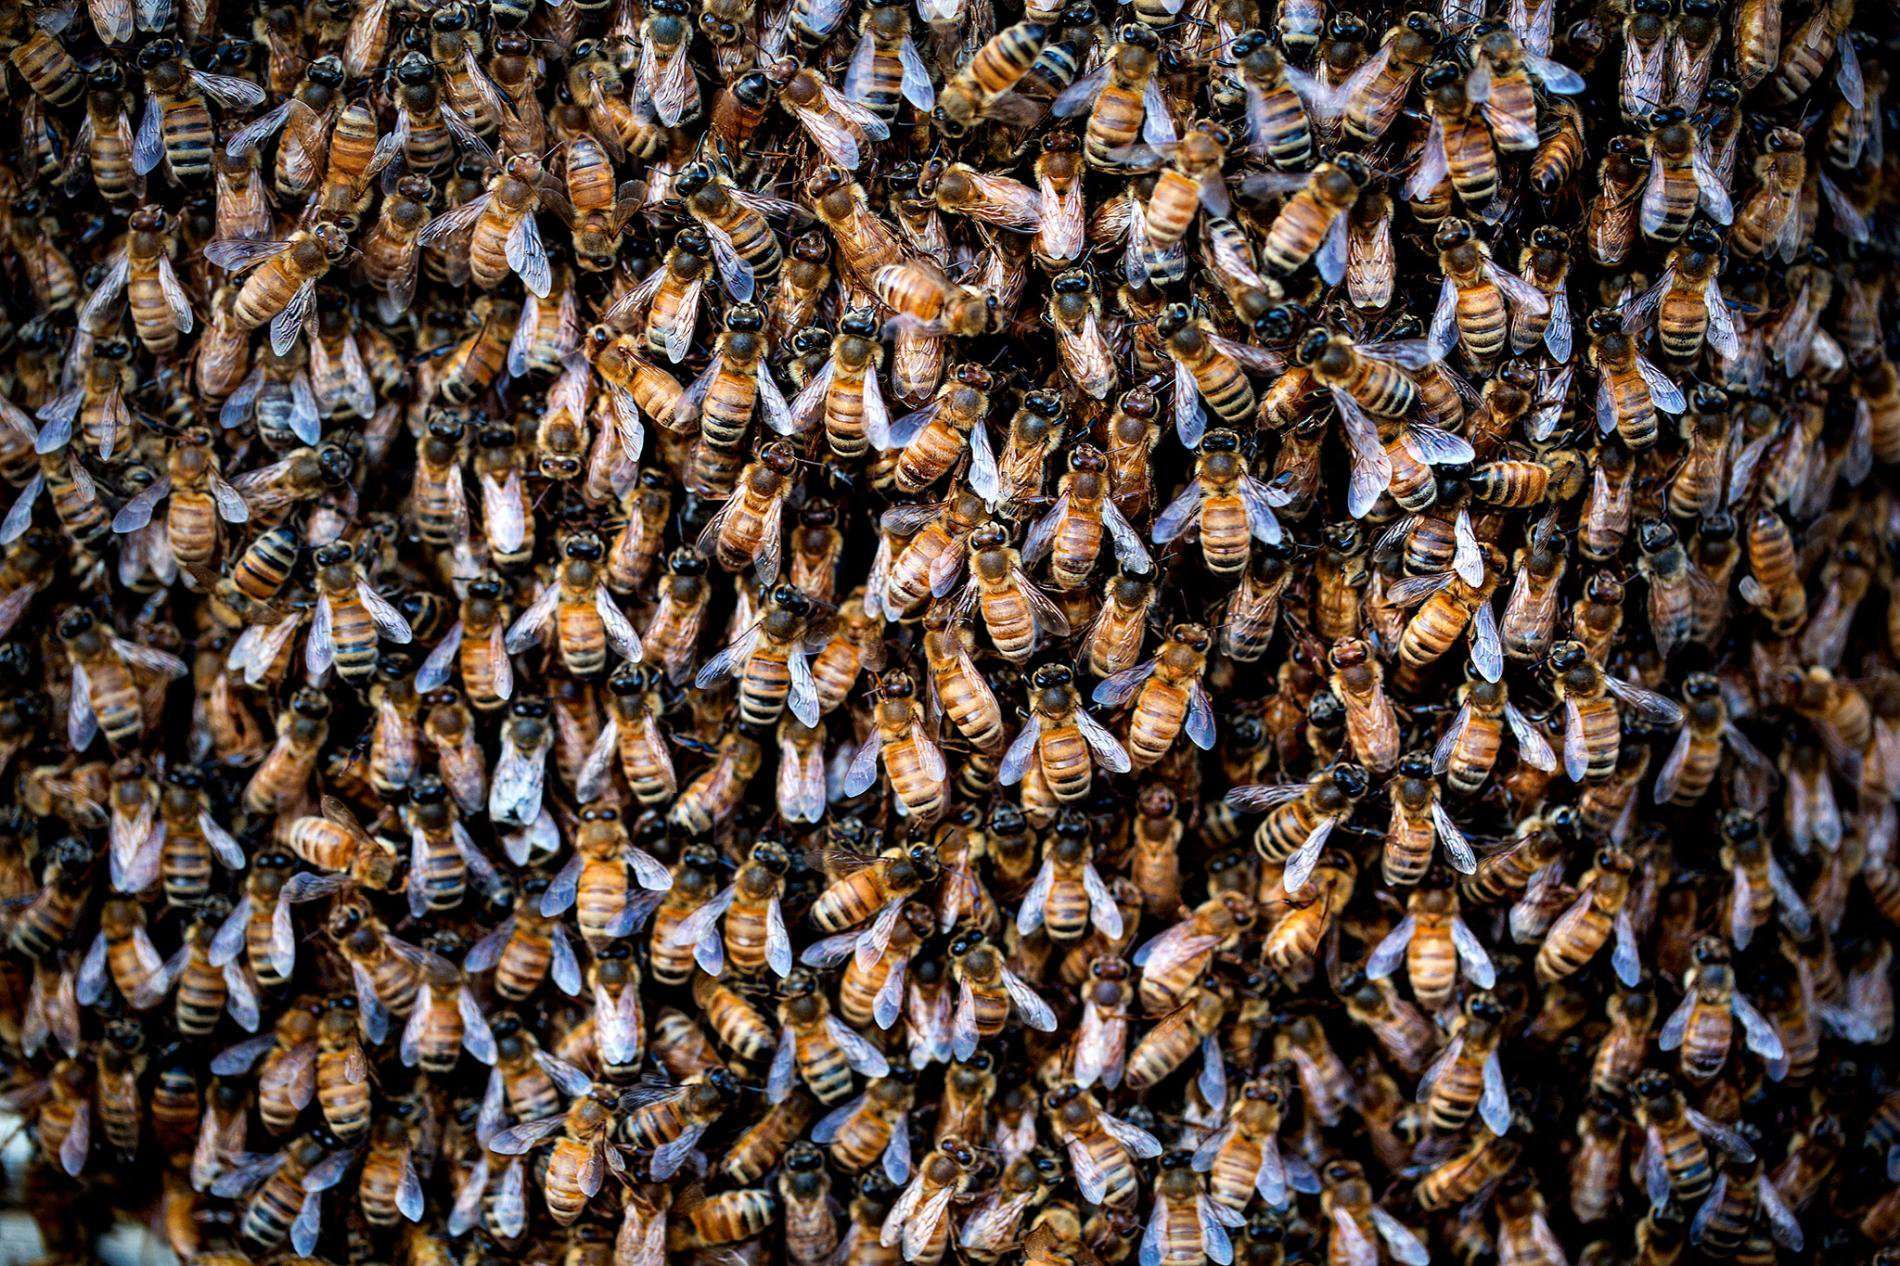 image for Insect 'apocalypse' in U.S. driven by 50x increase in toxic pesticides